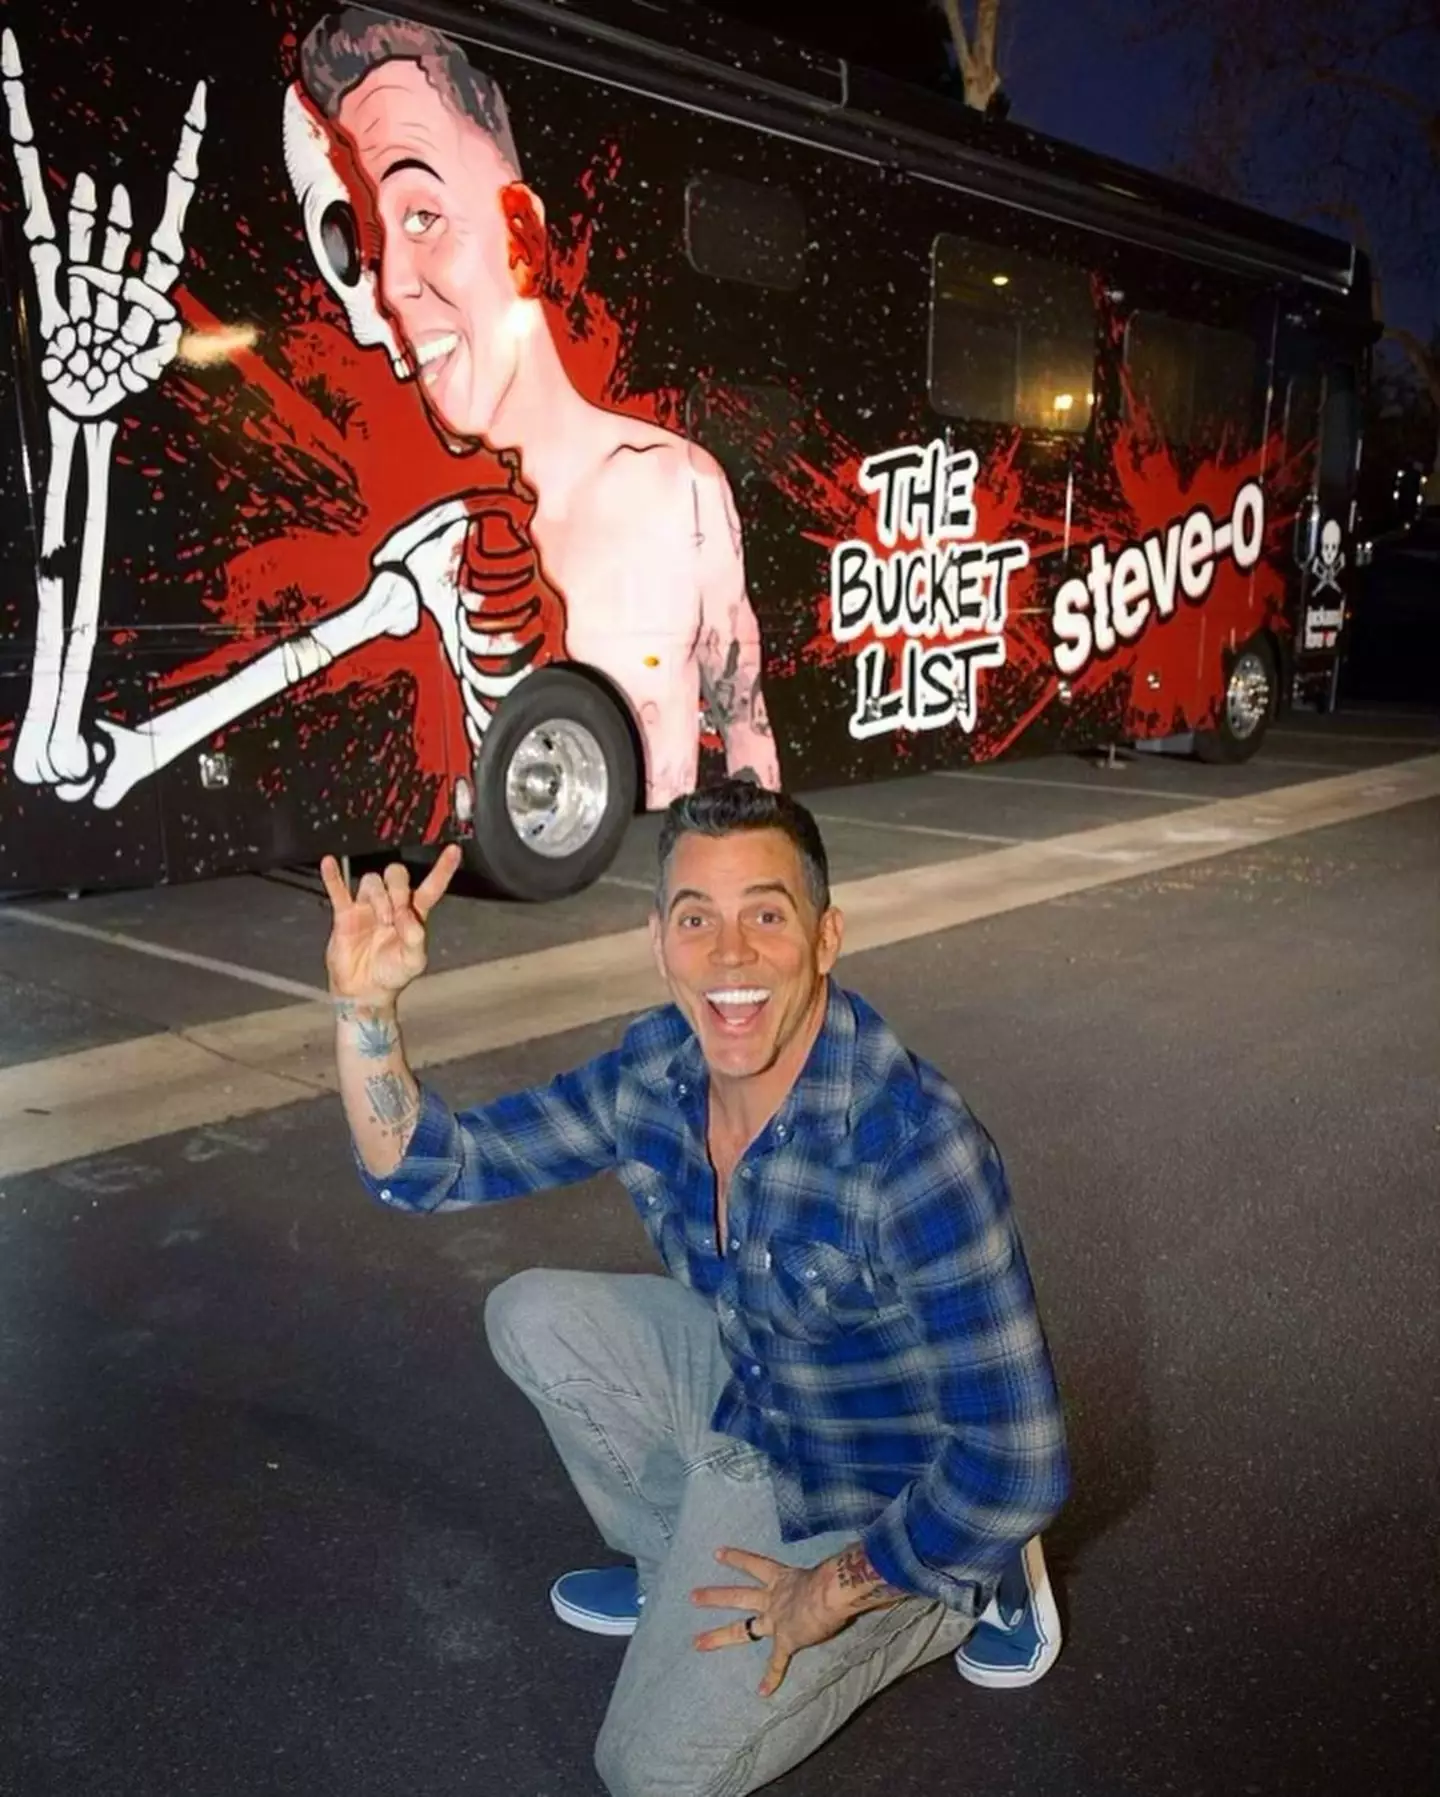 A number of fans have claimed Steve-O was rude at a meet and greet.